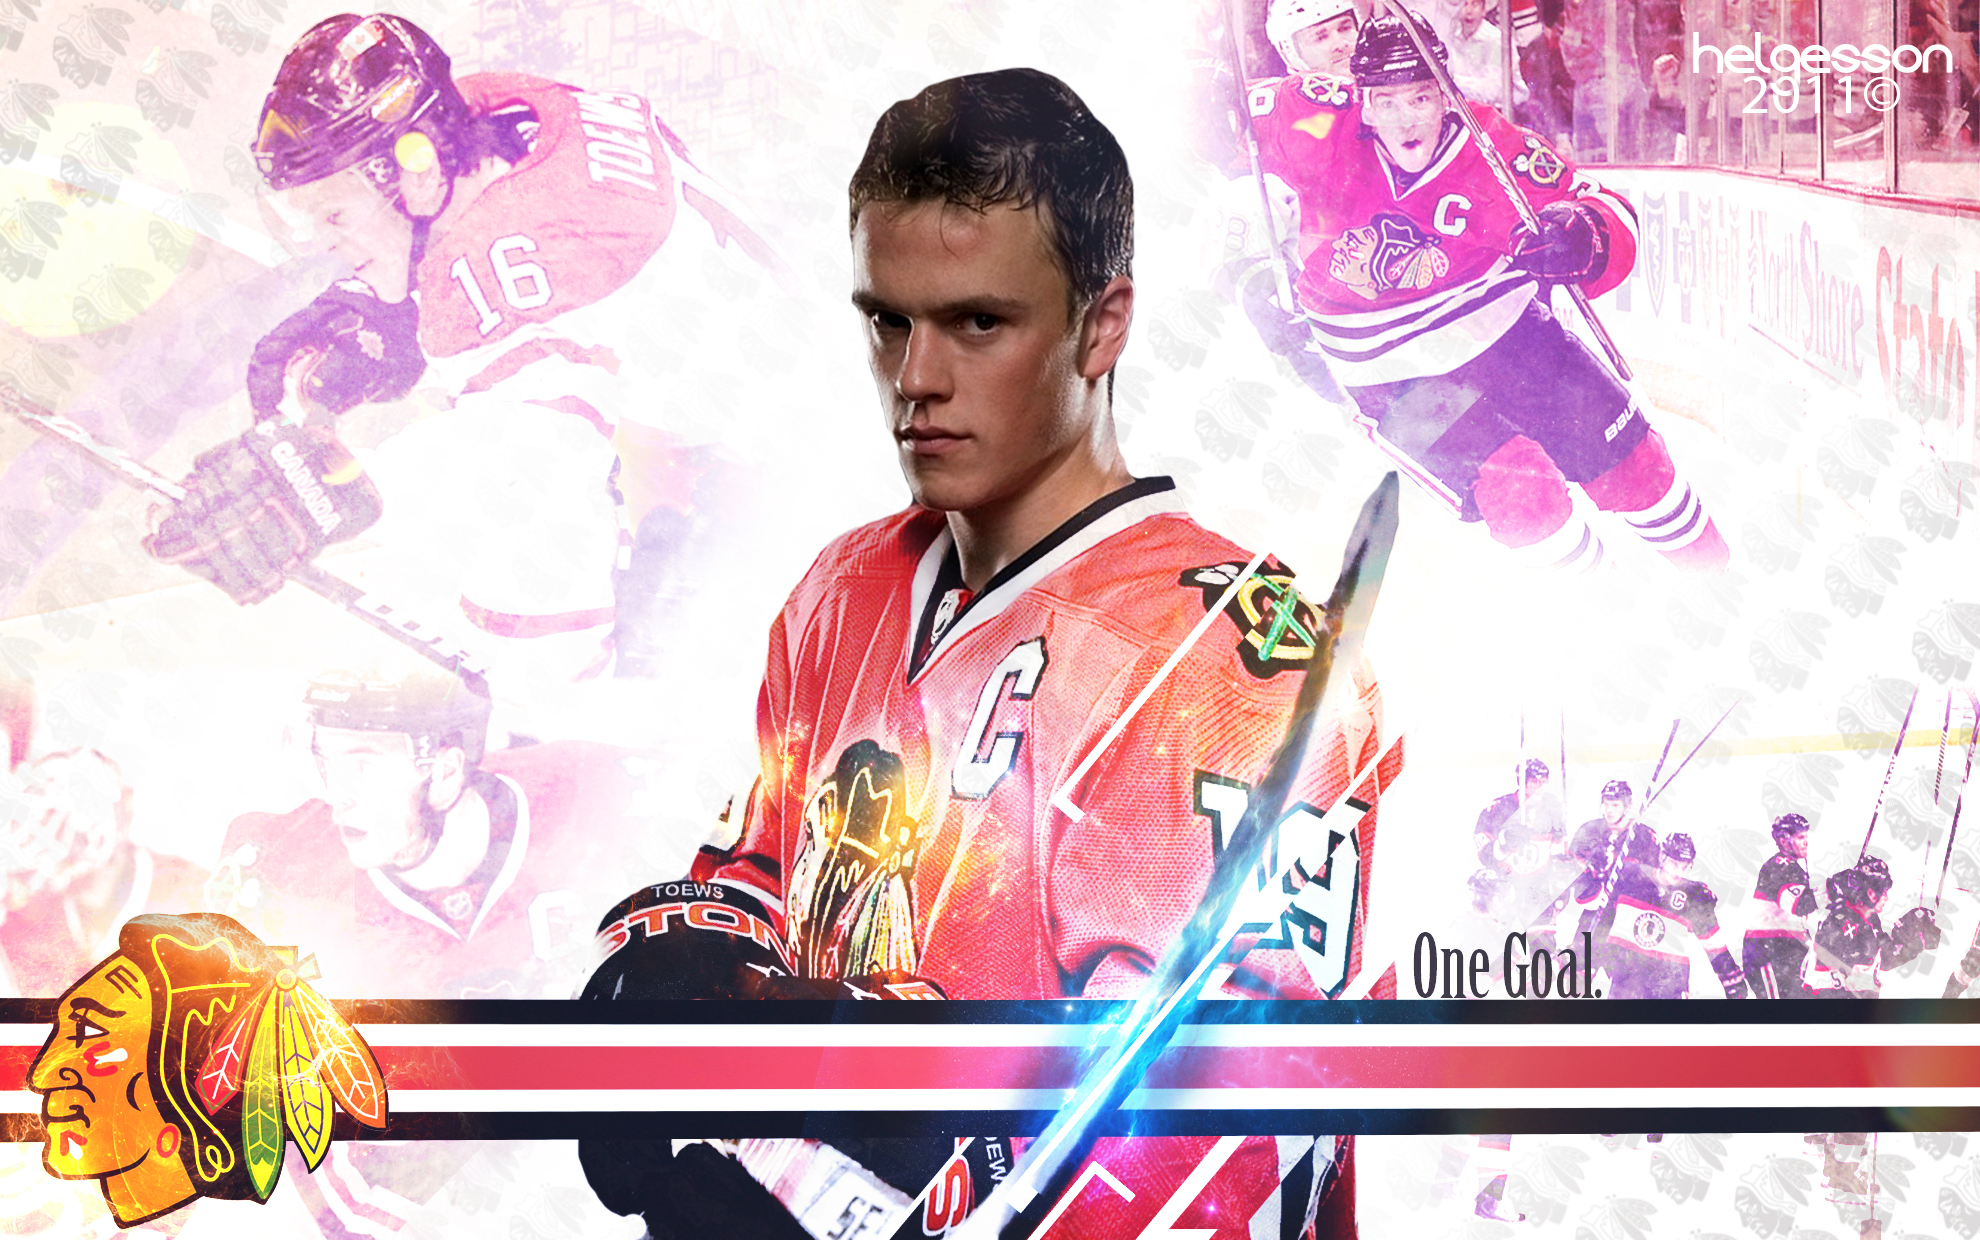 The captain of the team Jonathan Toews wallpaper and image